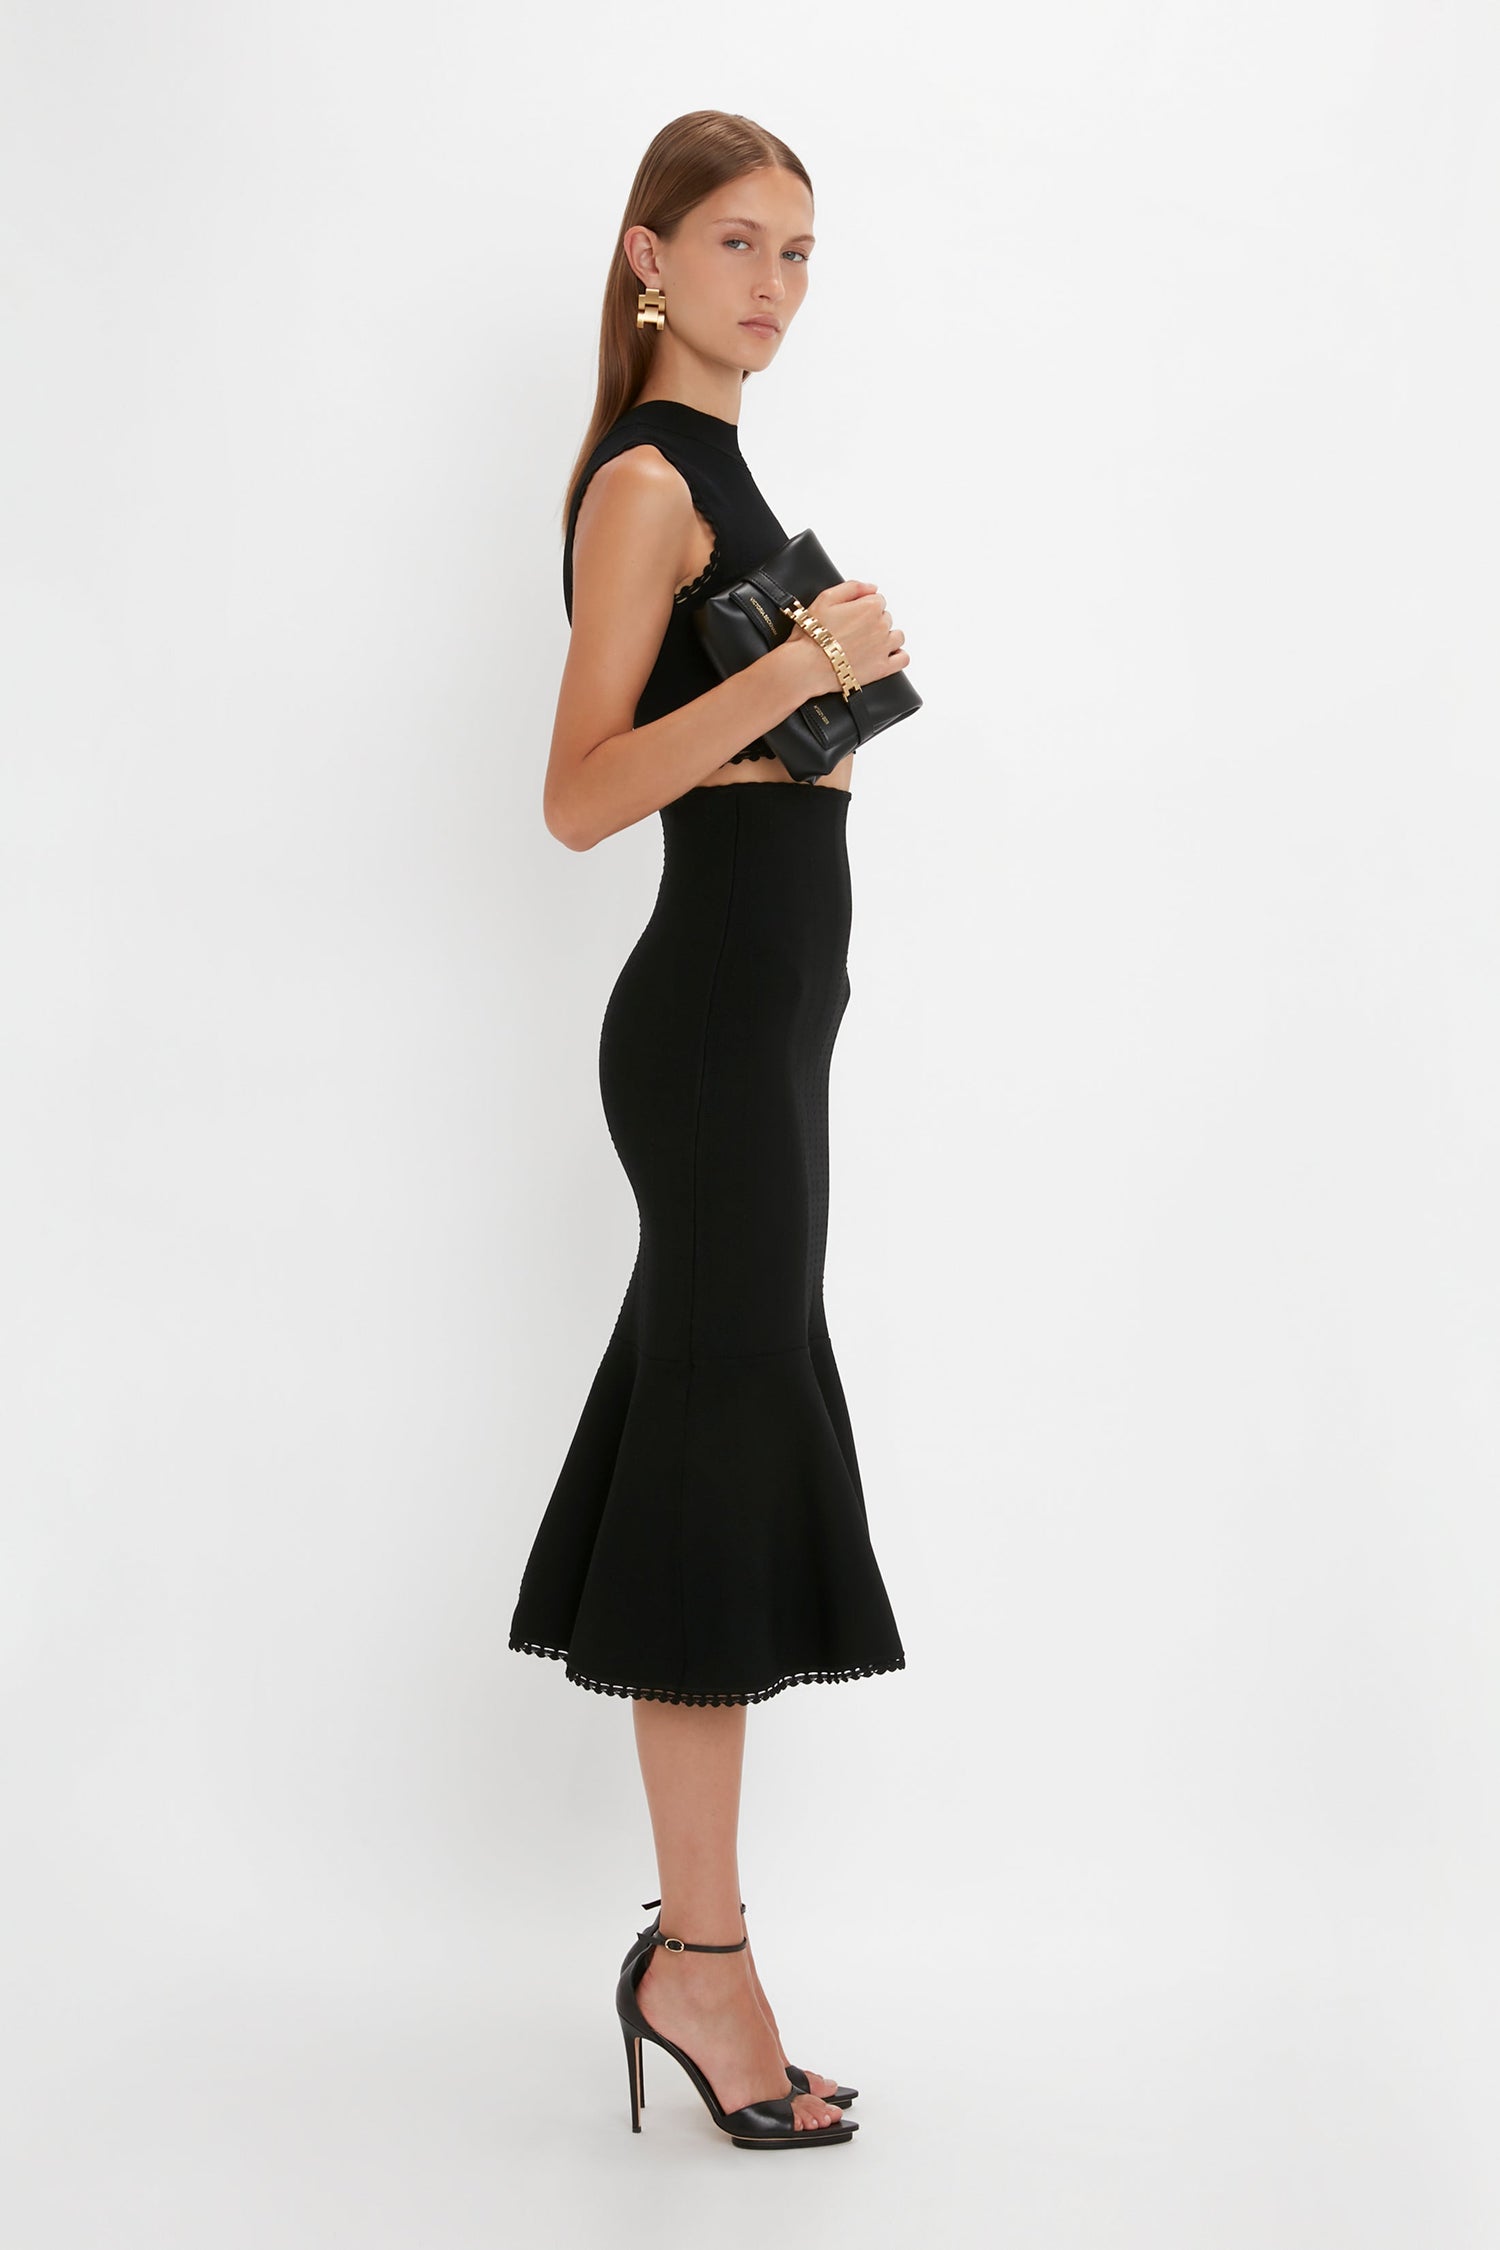 A person stands sideways wearing a sleeveless Victoria Beckham VB Body Scallop Trim Flared Skirt In Black with a flared silhouette and scallop trim, paired with black high-heeled sandals, and holding a black clutch bag.